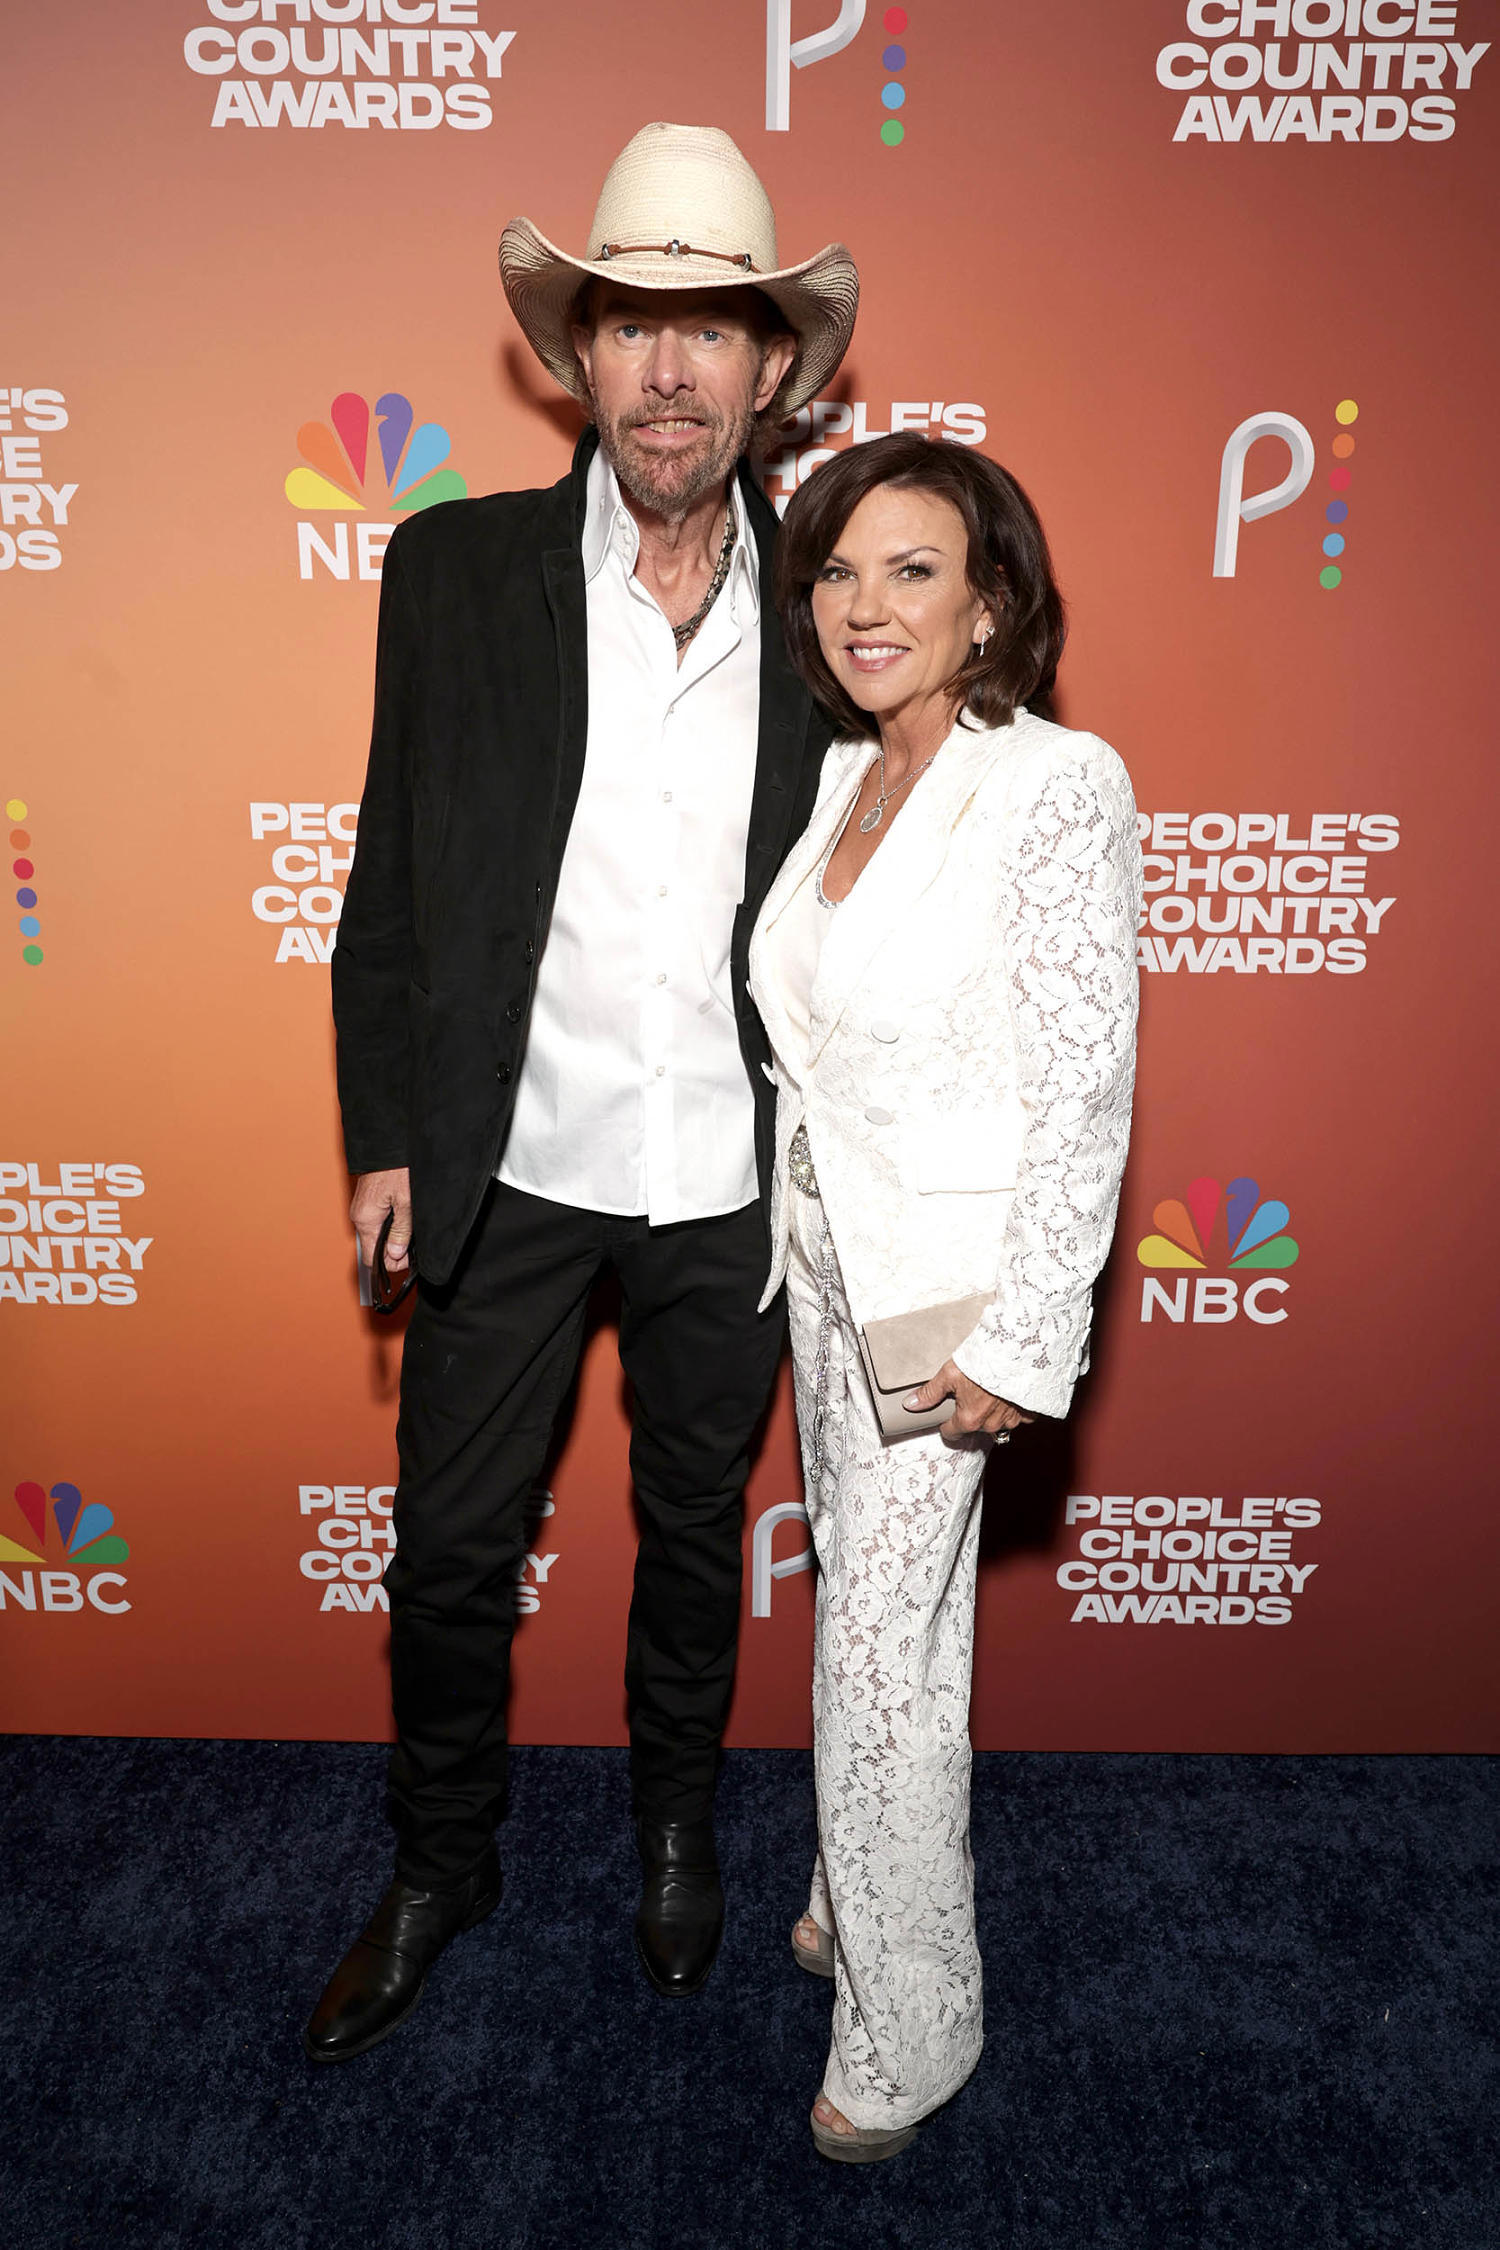 Toby Keith was married to Tricia Lucus. What to know about his wife